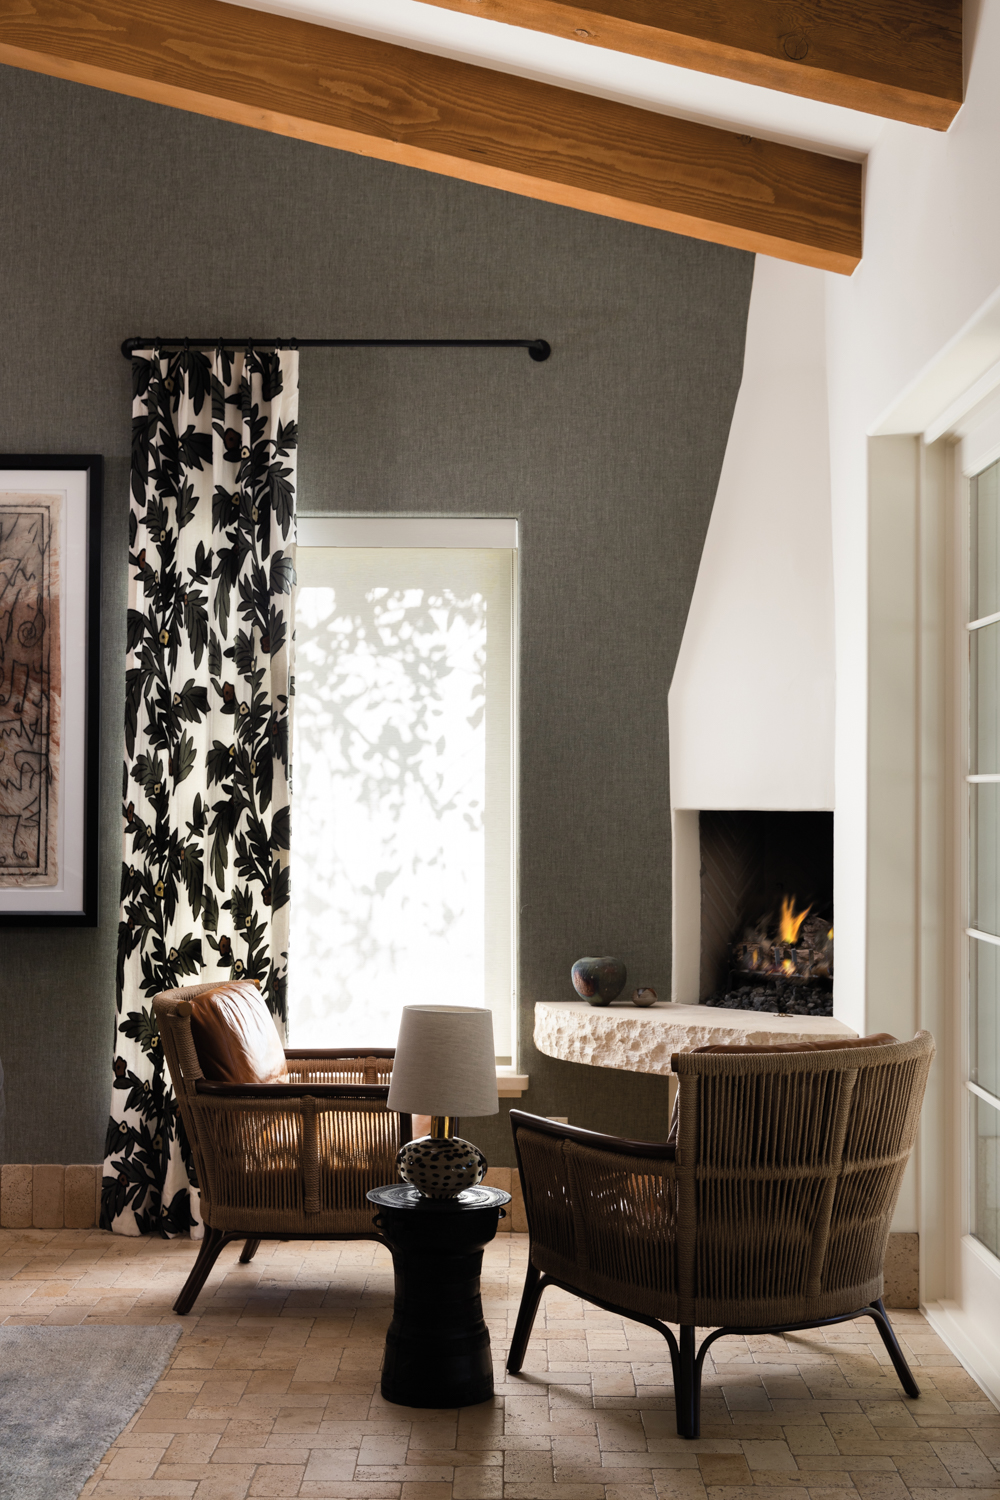 grasscloth walls, patterned black-and-white drapes...